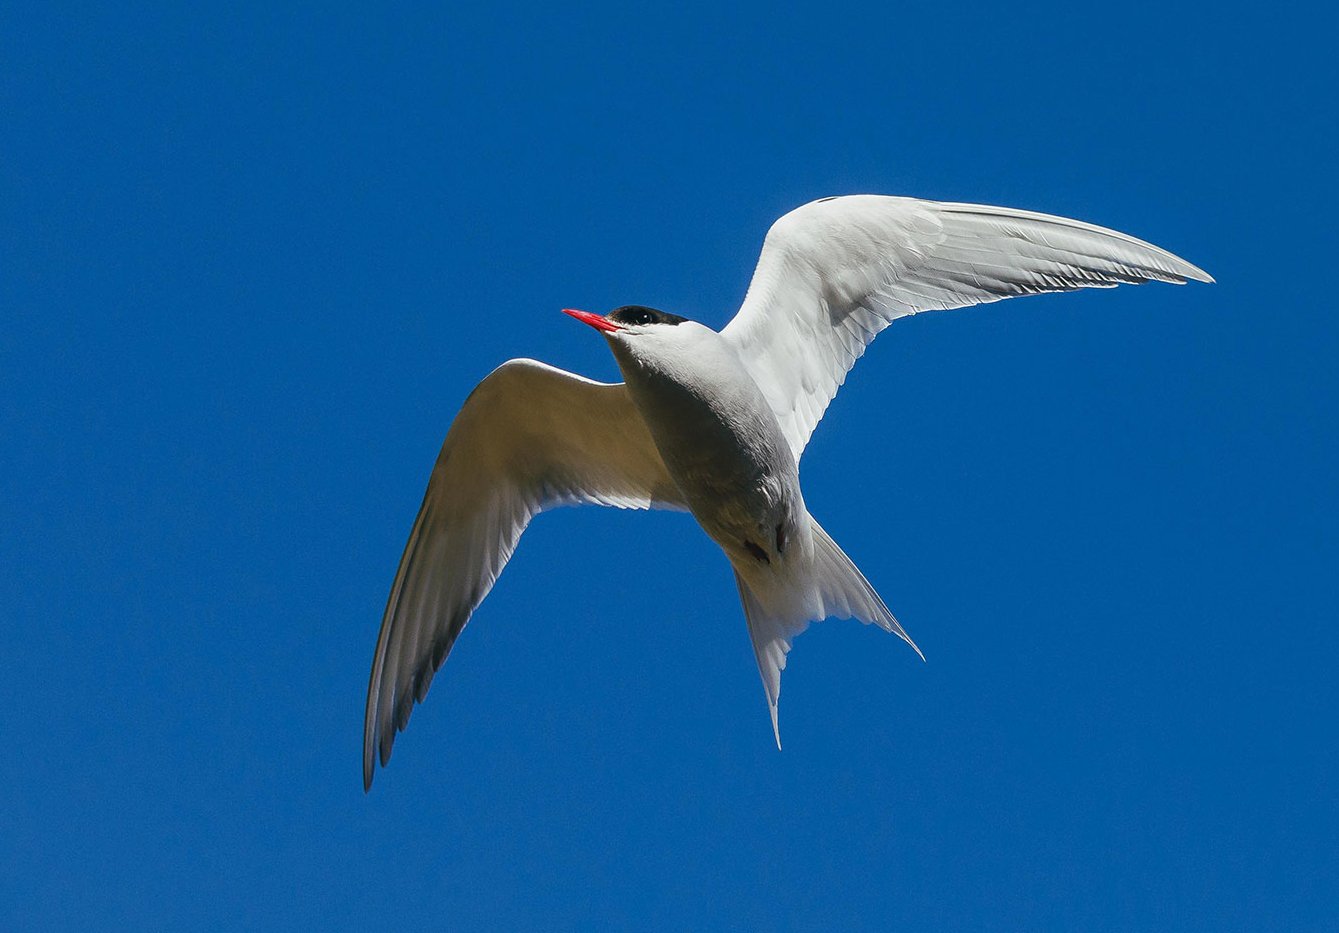 The Antarctic Tern, also known as the Arctic Tern. It thrives in both poles